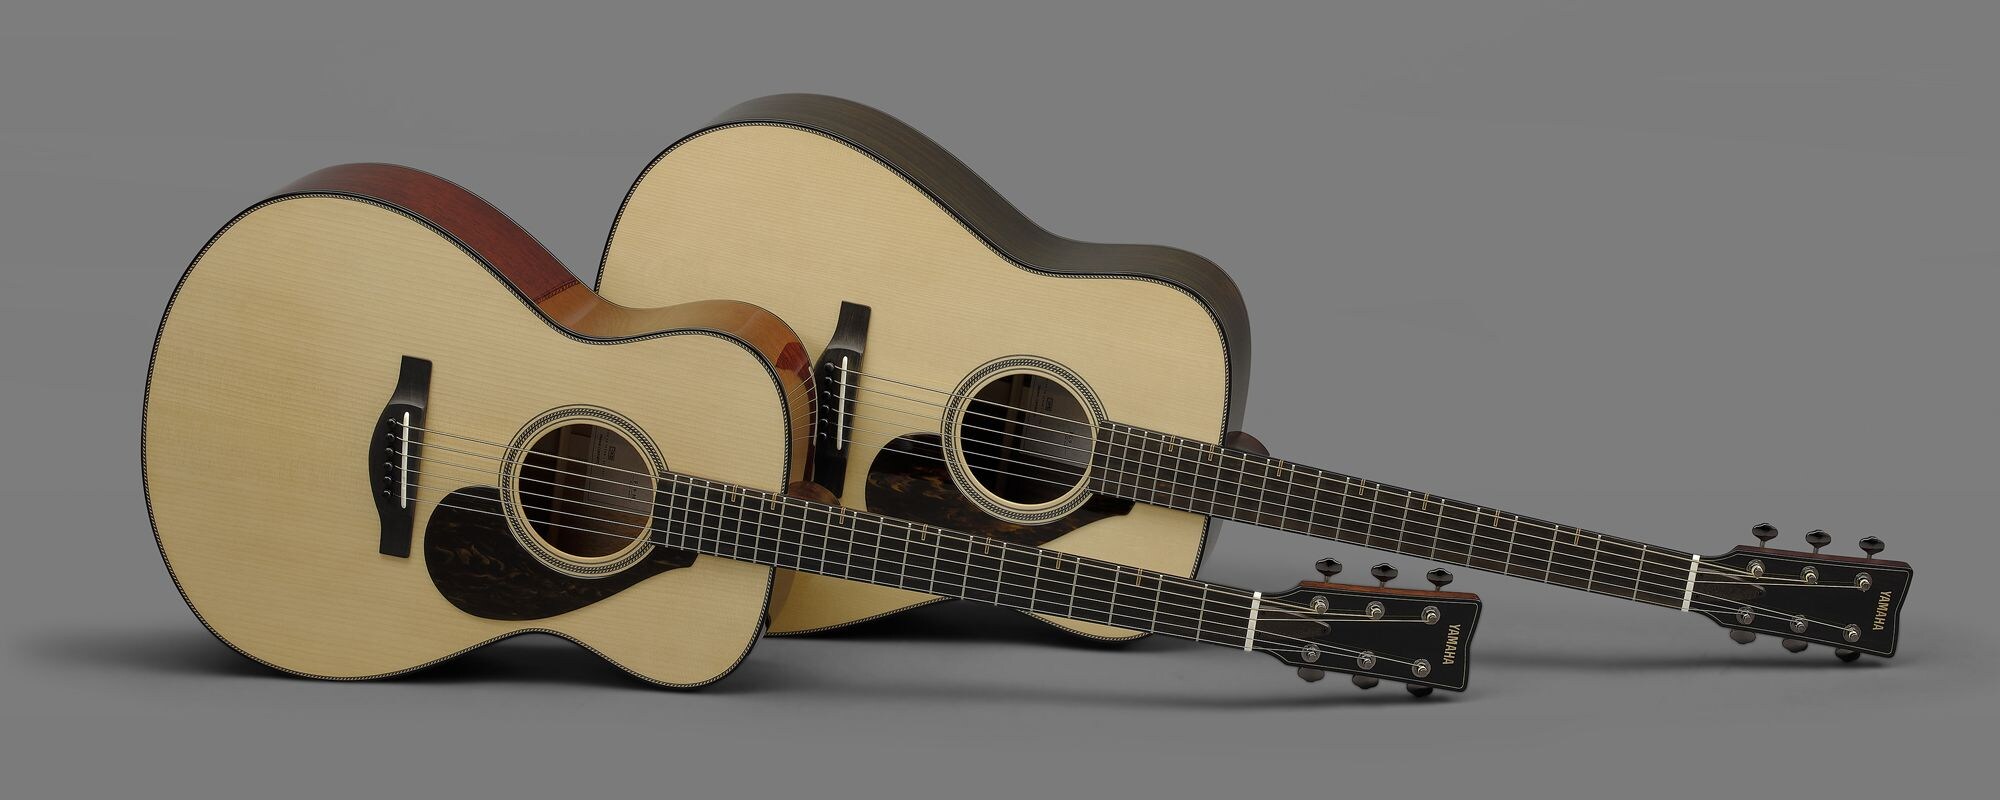 A FG9 guitar and a FS9 guitar facing front, one behind the other, propped on their sides on the floor. The FS9 is in front, showing its slightly smaller concert-style body against the larger dreadnought-style FG9.